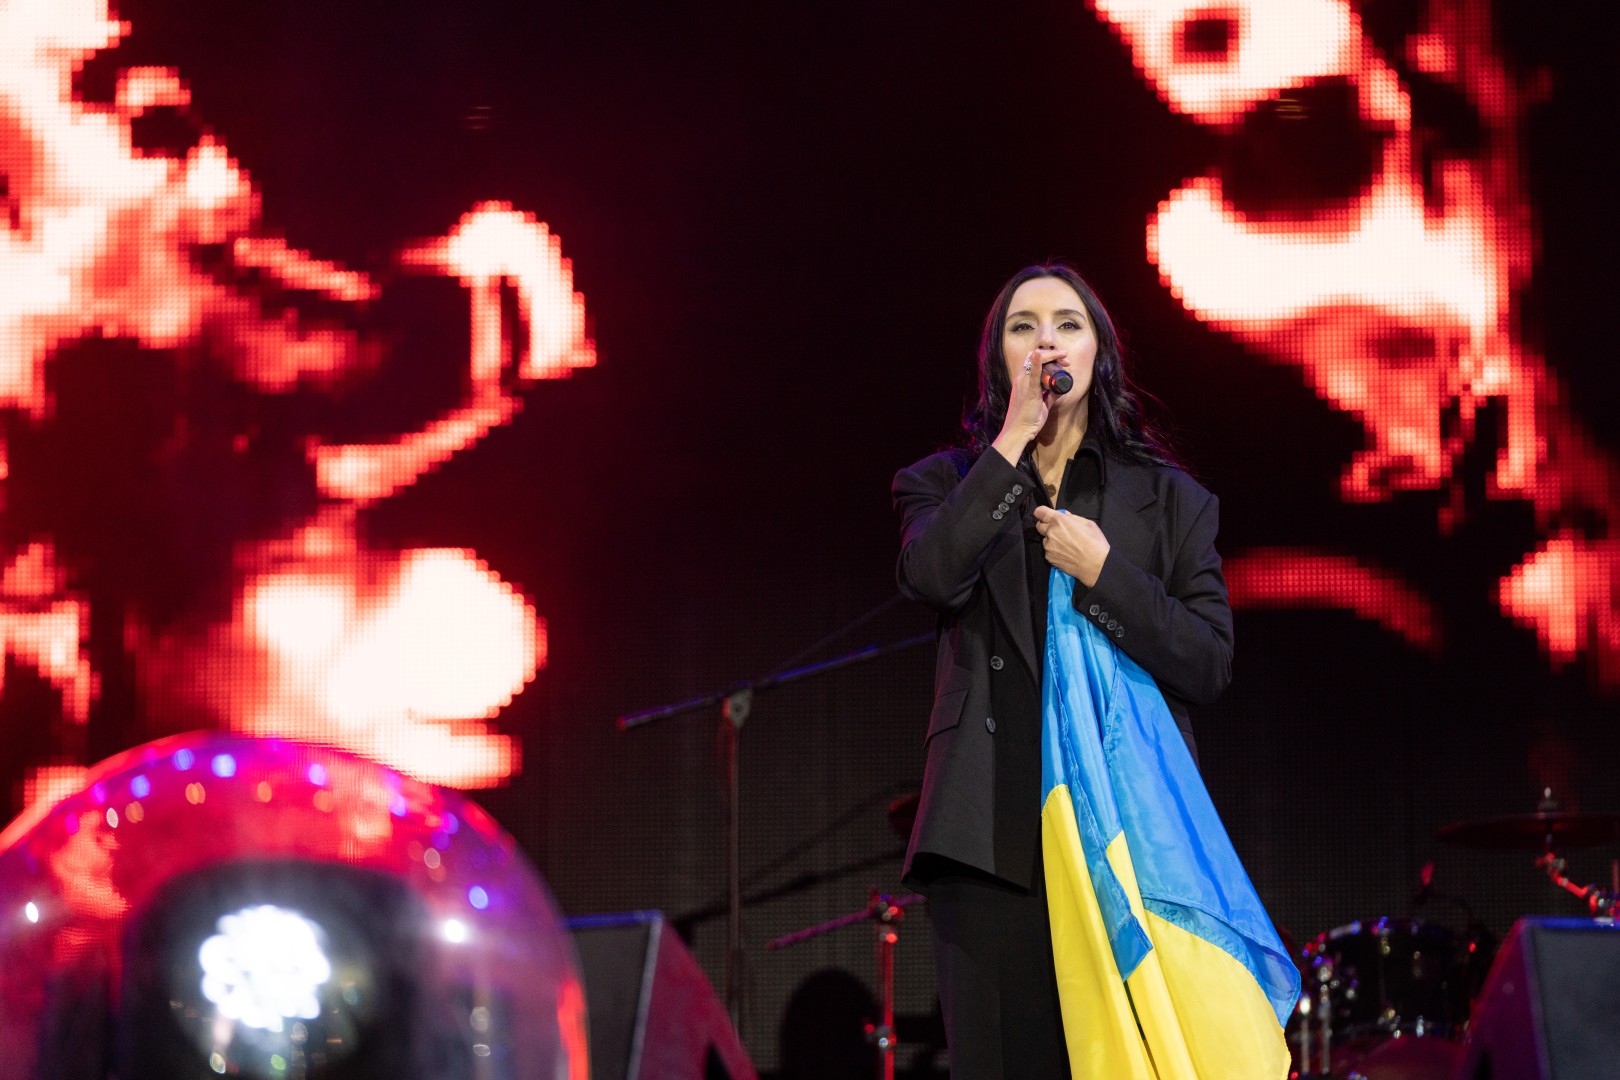 Jamala at National Arena in Bucharest on March 12, 2022 (811c3959ad)